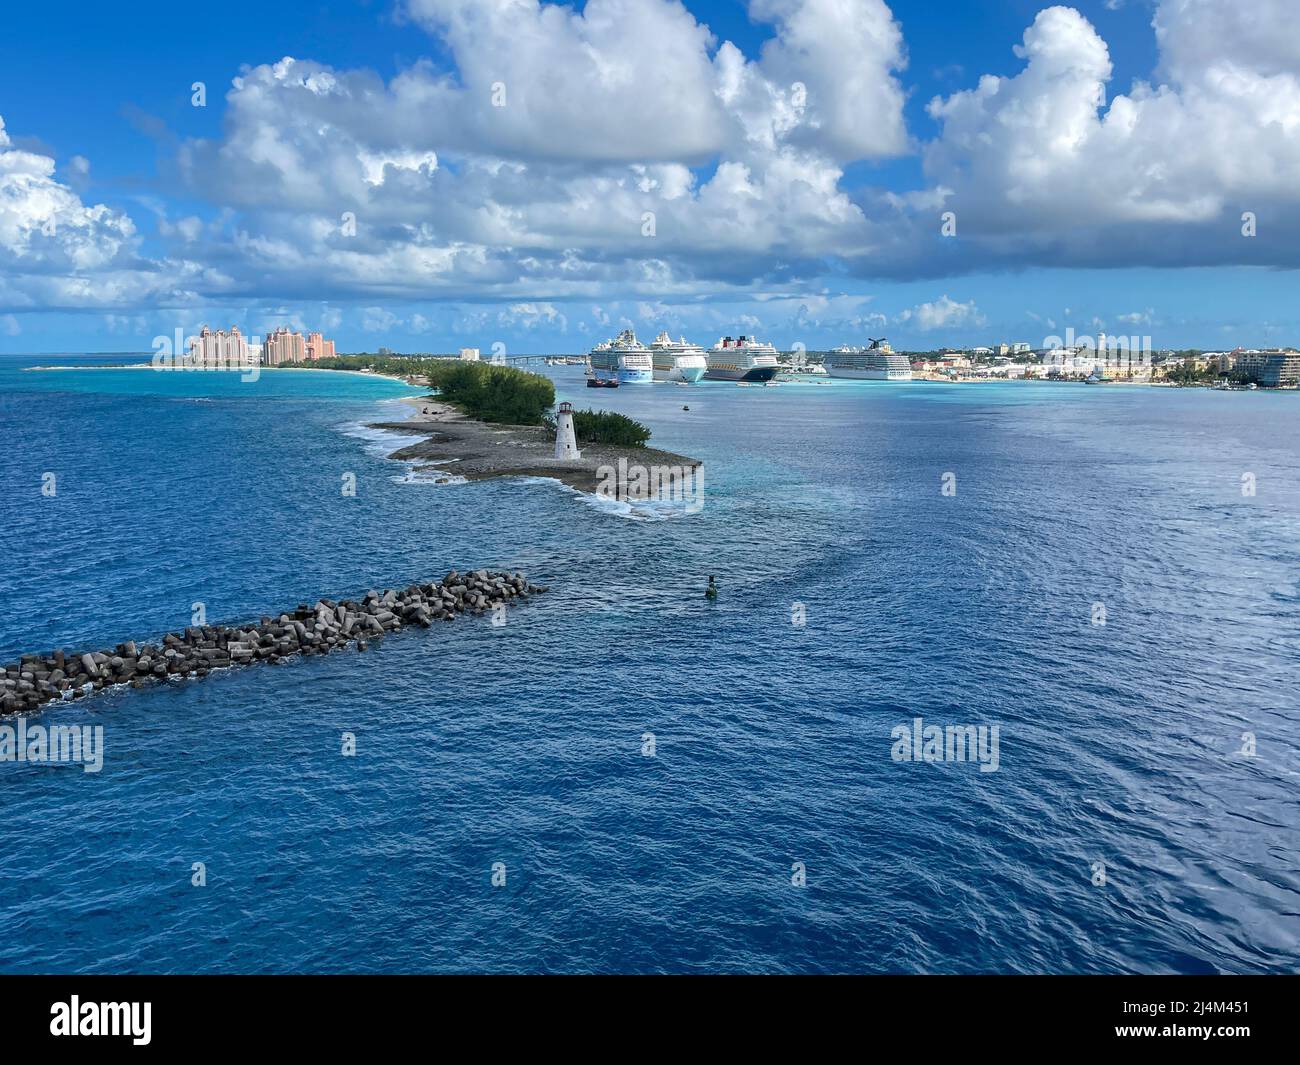 Nassau, Bahamas - October 13, 2021: An aerial view of the cruise ship harbor in Nassau, Bahamas from a cruise ship that is sailing away. Stock Photo